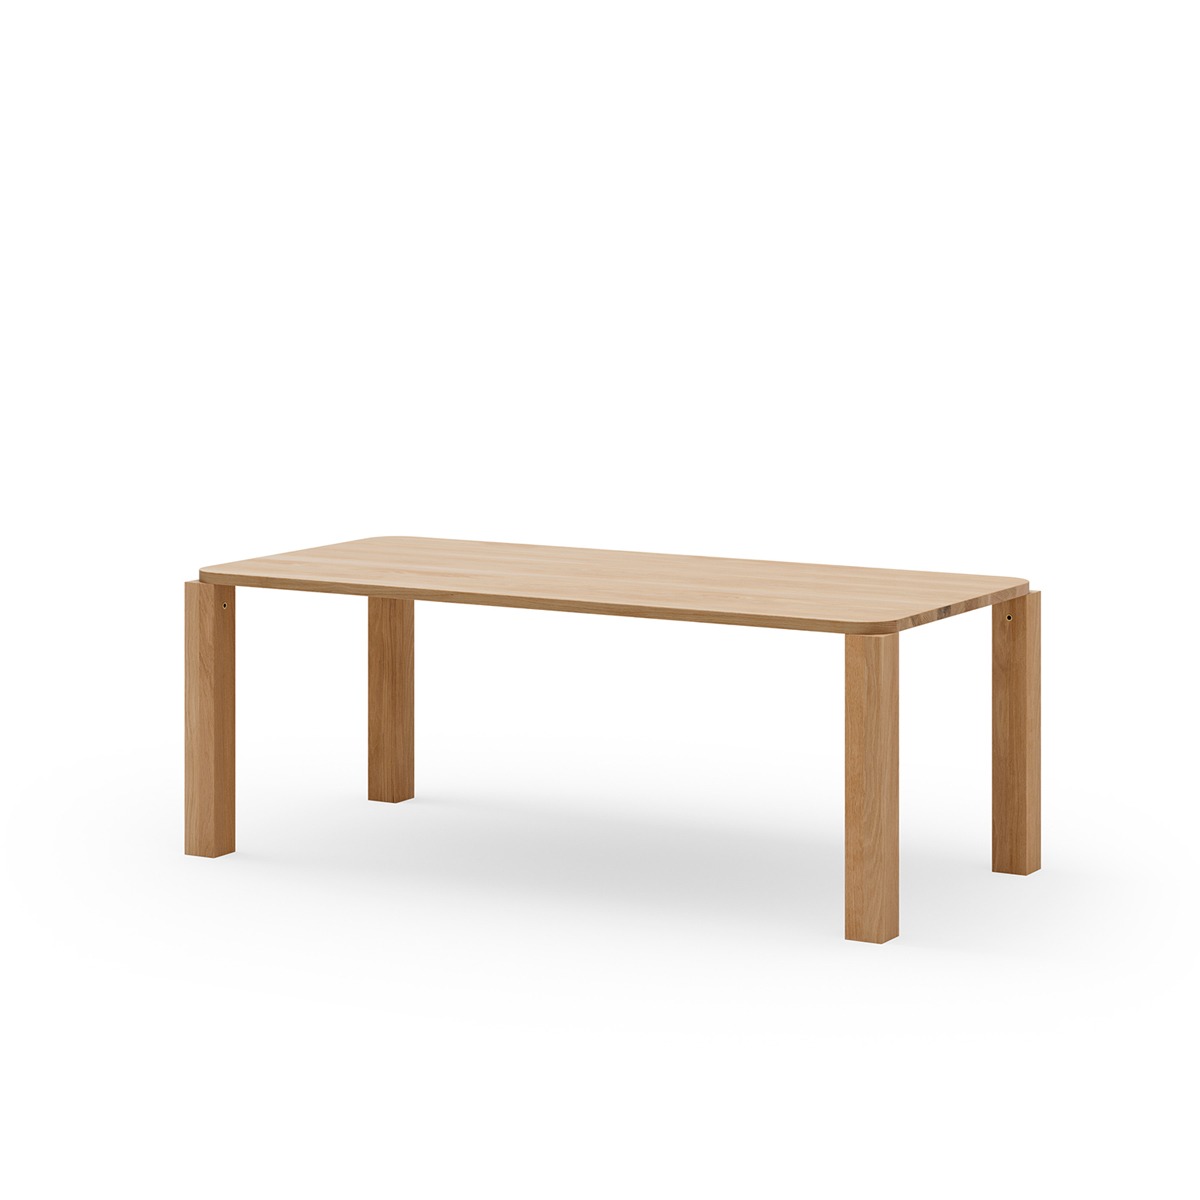 New Works Atlas Dining Table 200x95